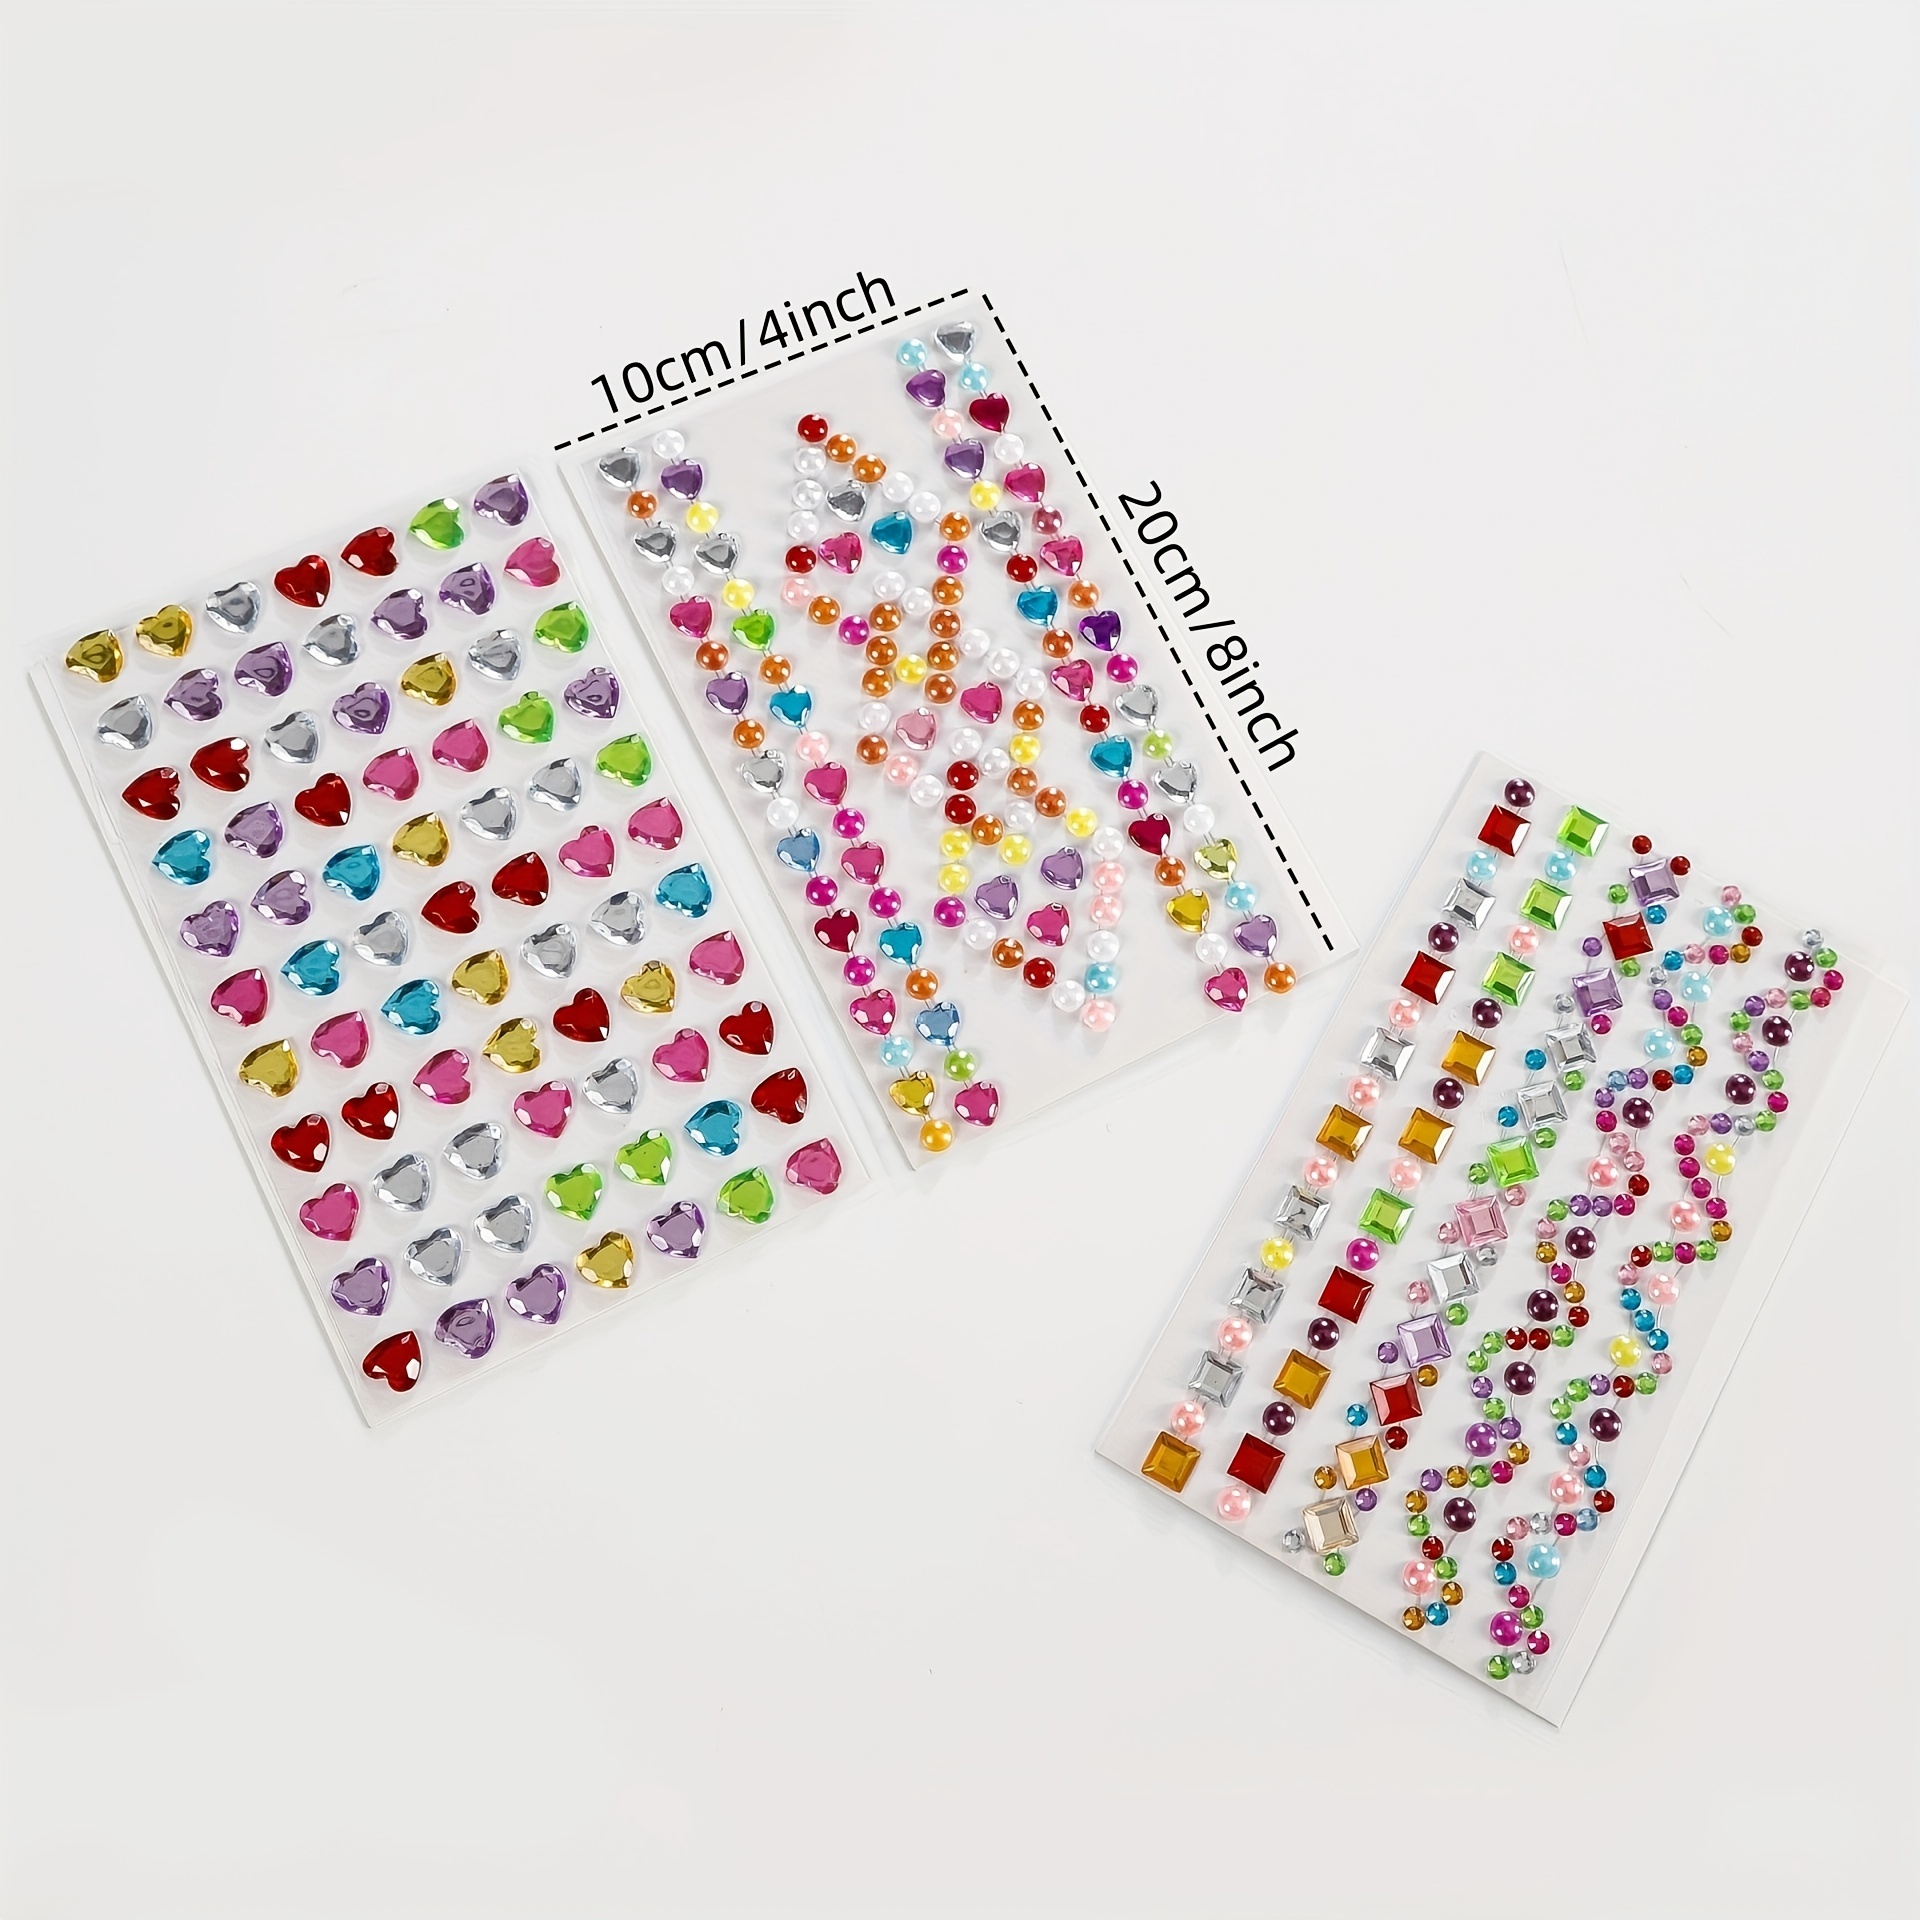 5 Sheets Jewels Stickers Self-Adhesive Craft Jewels and Gems